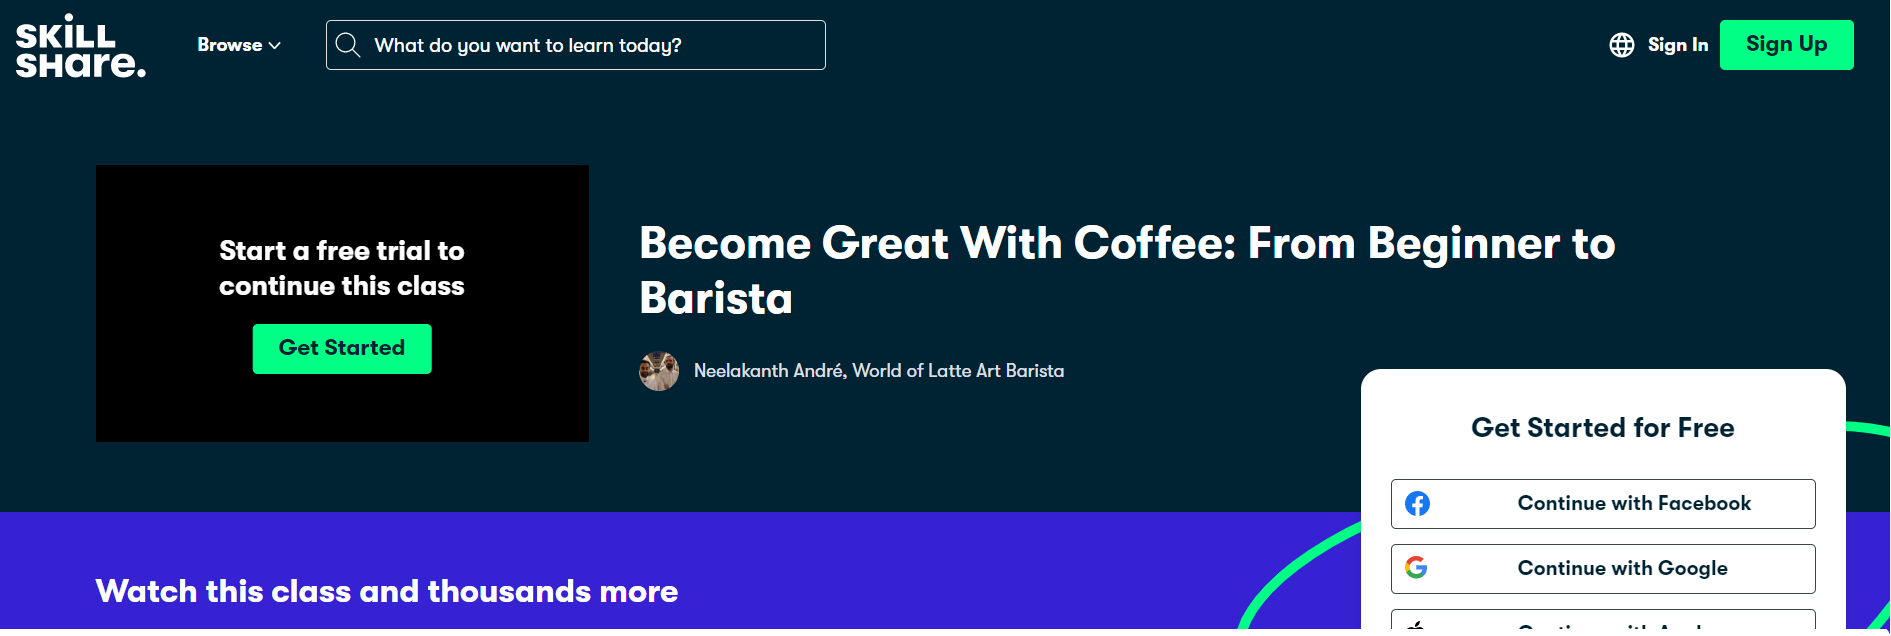 Become Great With Coffee